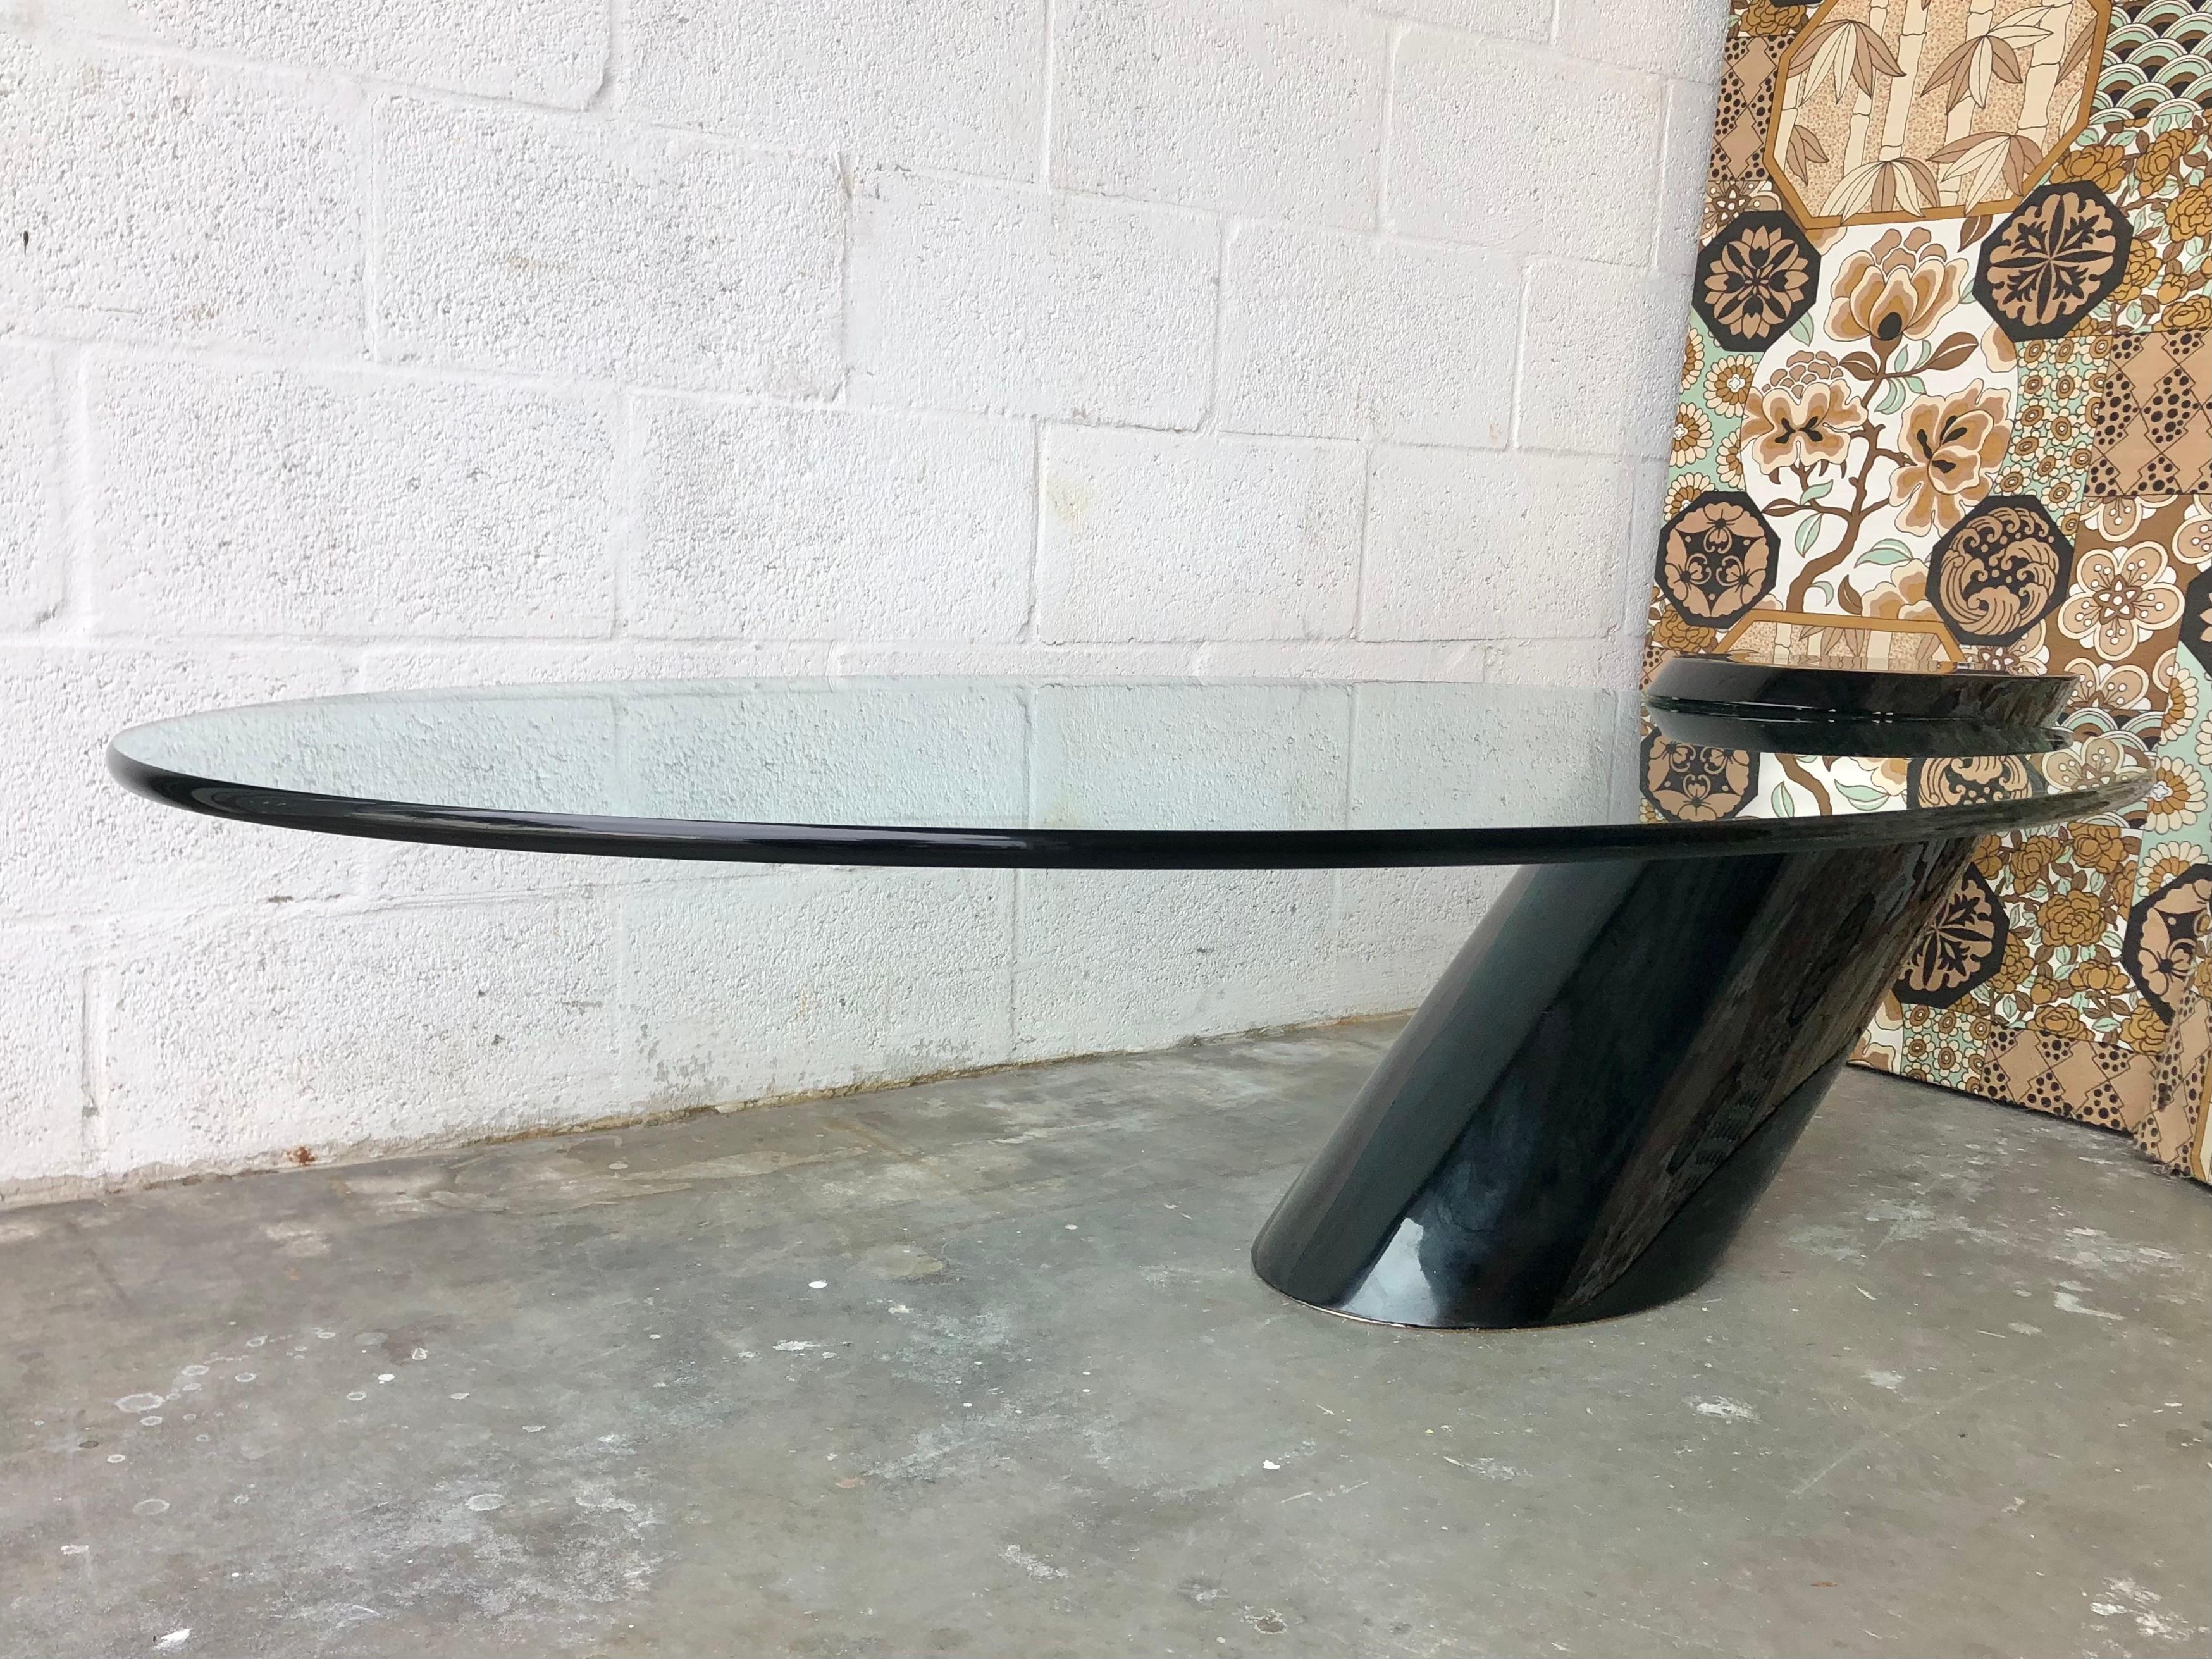 Vintage mid-century Cantilever coffee / coctail table attributed to J Wade Beam for Breuton. Circa 1970s. 
Features a black polished base that protrudes from the floor at a 45 degree angle with cantilevered oval glass top. The base is perfectly